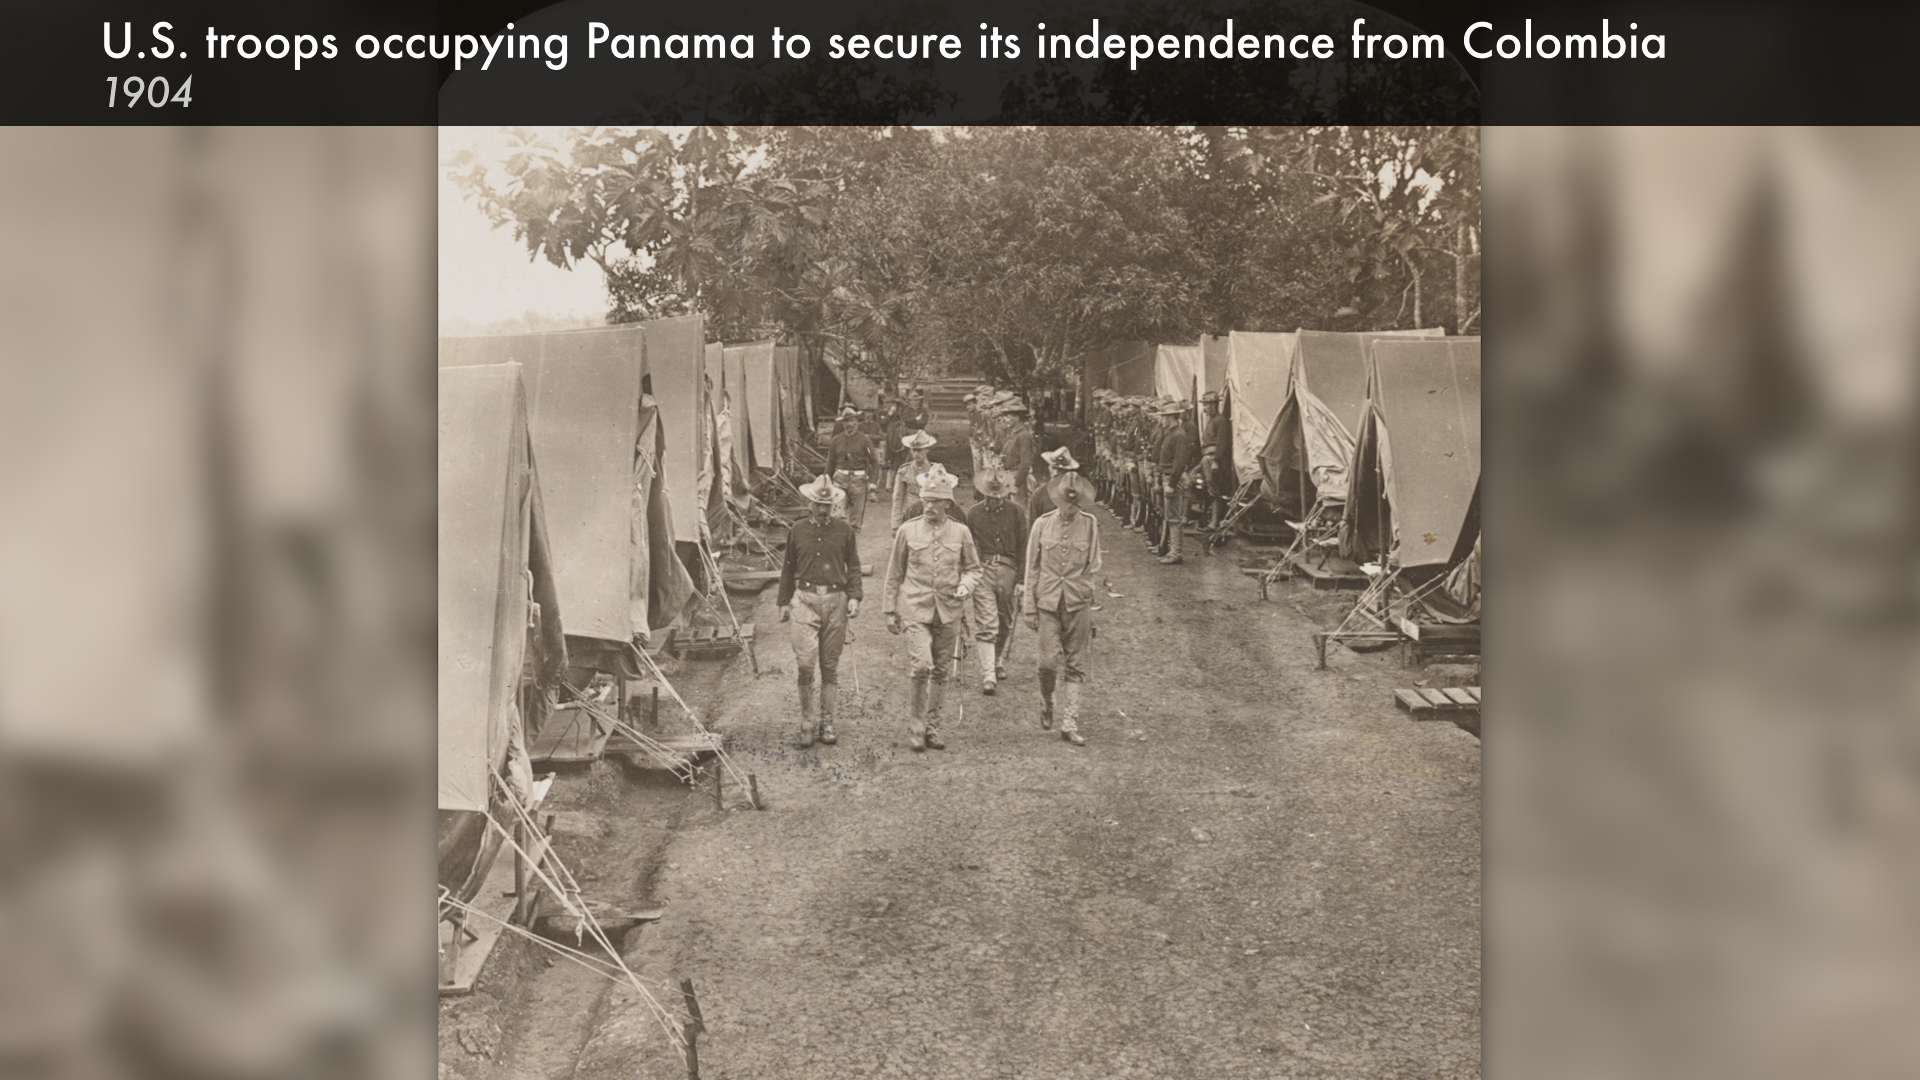 From what country did Panama gain independence in the late 1800s